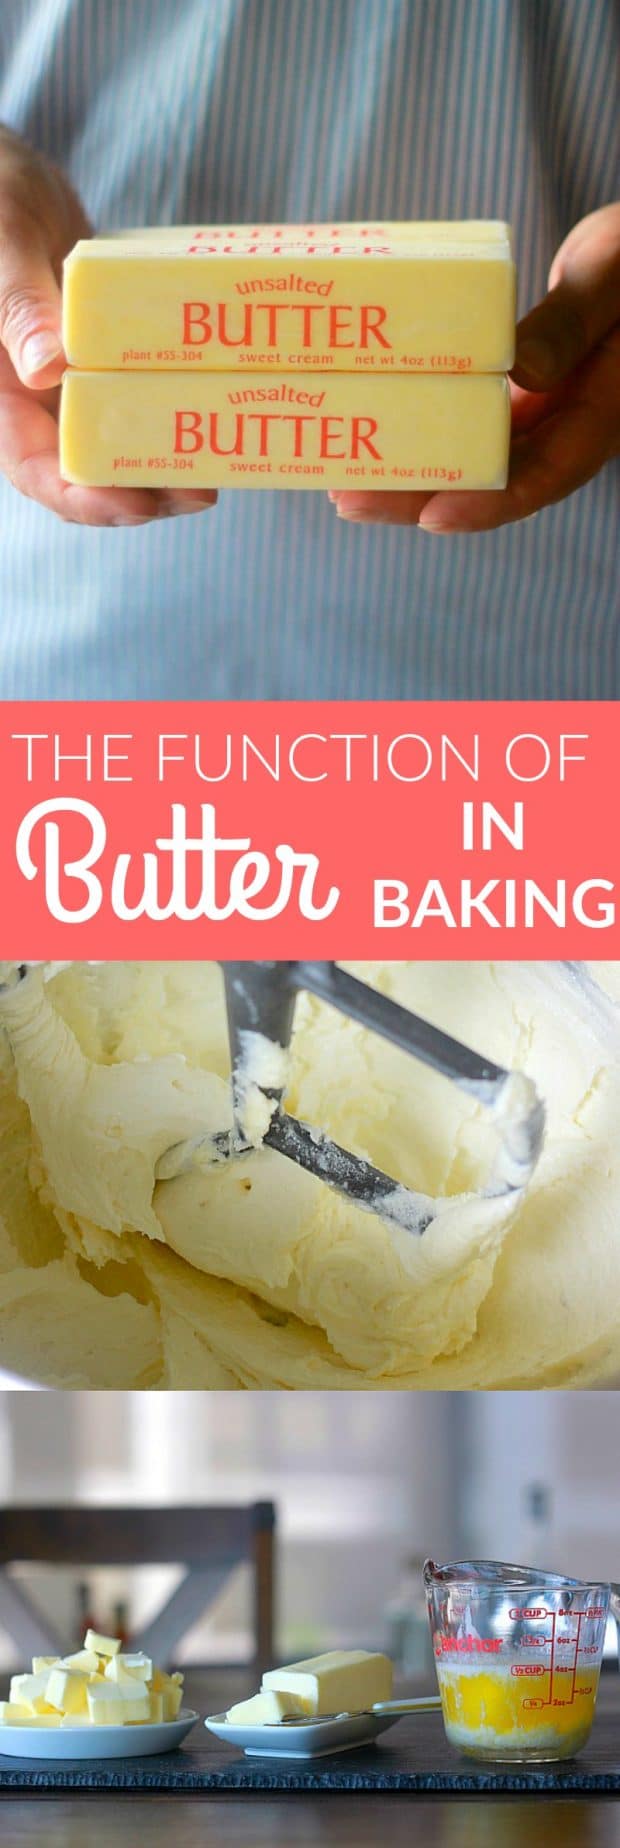 Understanding the function of butter in baking can be incredibly useful in becoming a better baker! Butter is a key ingredient in many baked goods. Having a grasp on the science of butter's various roles in baking is beneficial in using butter more successfully to create beautiful pastries and baked goods. 